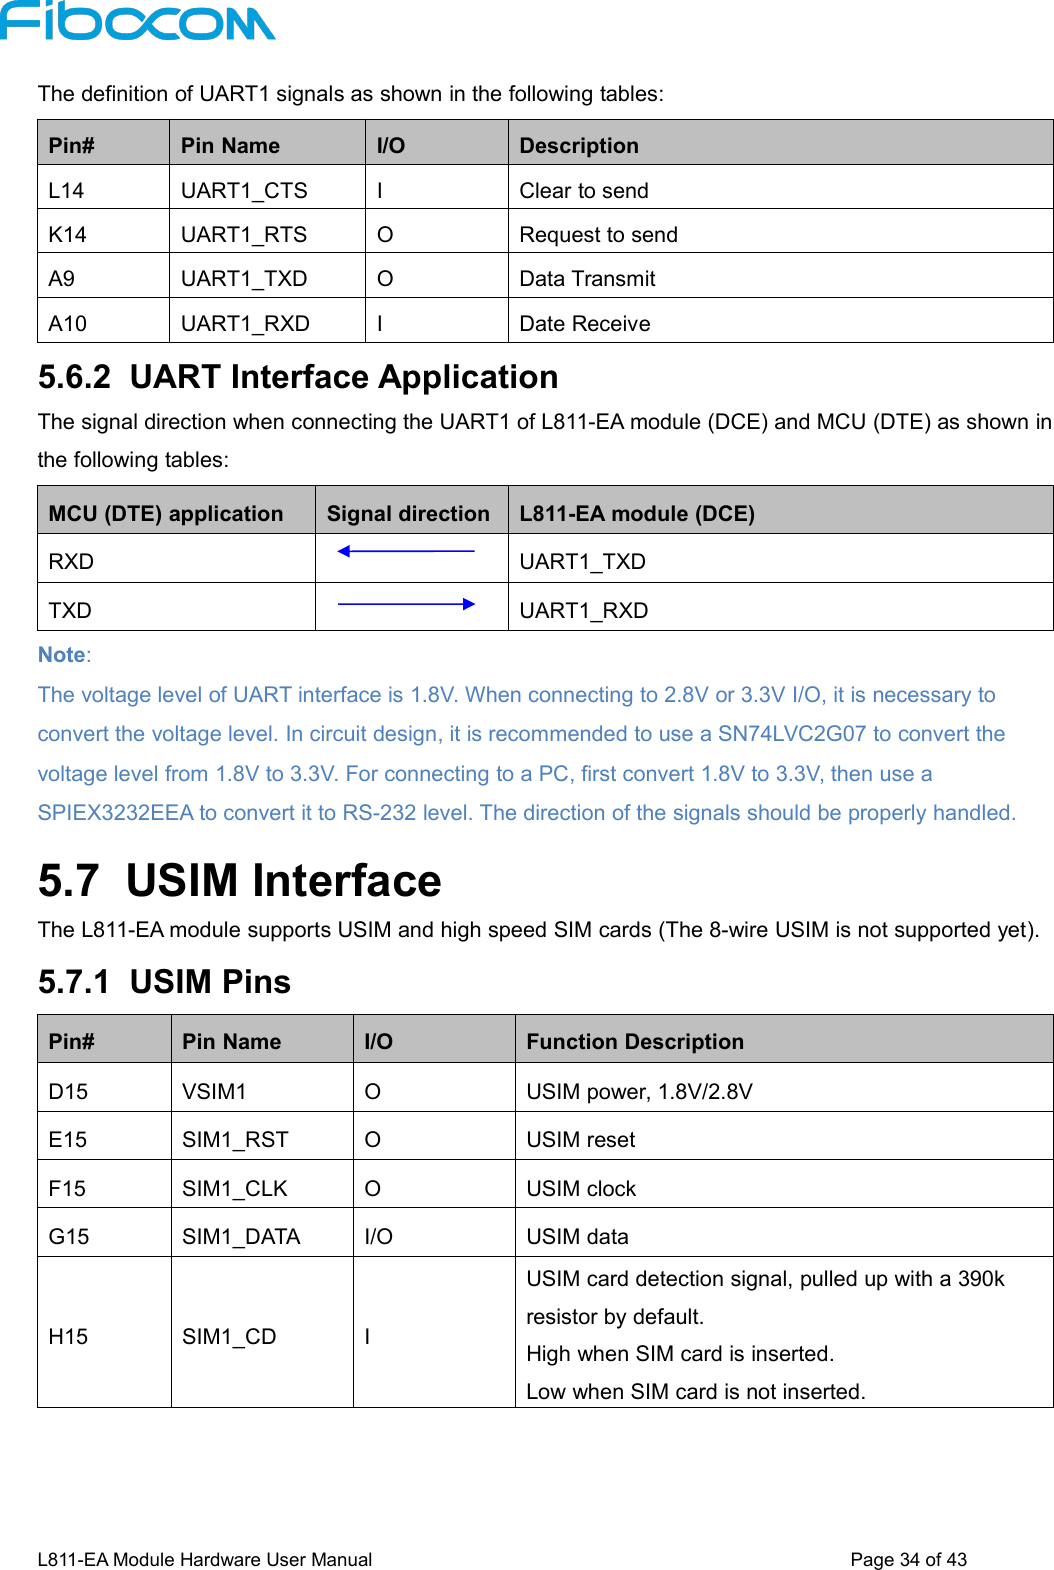 L811-EA Module Hardware User Manual Page34of43The definition of UART1 signals as shown in the following tables:Pin#Pin NameI/ODescriptionL14UART1_CTSIClear to sendK14UART1_RTSORequest to sendA9UART1_TXDOData TransmitA10UART1_RXDIDate Receive5.6.2 UART Interface ApplicationThe signal direction when connecting the UART1 of L811-EA module (DCE) and MCU (DTE) as shown inthe following tables:MCU (DTE) applicationSignal directionL811-EA module (DCE)RXDUART1_TXDTXDUART1_RXDNote:The voltage level of UART interface is 1.8V. When connecting to 2.8V or 3.3V I/O, it is necessary toconvert the voltage level. In circuit design, it is recommended to use a SN74LVC2G07 to convert thevoltage level from 1.8V to 3.3V. For connecting to a PC, first convert 1.8V to 3.3V, then use aSPIEX3232EEA to convert it to RS-232 level. The direction of the signals should be properly handled.5.7 USIM InterfaceThe L811-EA module supports USIM and high speed SIM cards (The 8-wire USIM is not supported yet).5.7.1 USIM PinsPin#Pin NameI/OFunction DescriptionD15VSIM1OUSIM power, 1.8V/2.8VE15SIM1_RSTOUSIM resetF15SIM1_CLKOUSIM clockG15SIM1_DATAI/OUSIM dataH15SIM1_CDIUSIM card detection signal, pulled up with a 390kresistor by default.High when SIM card is inserted.Low when SIM card is not inserted.